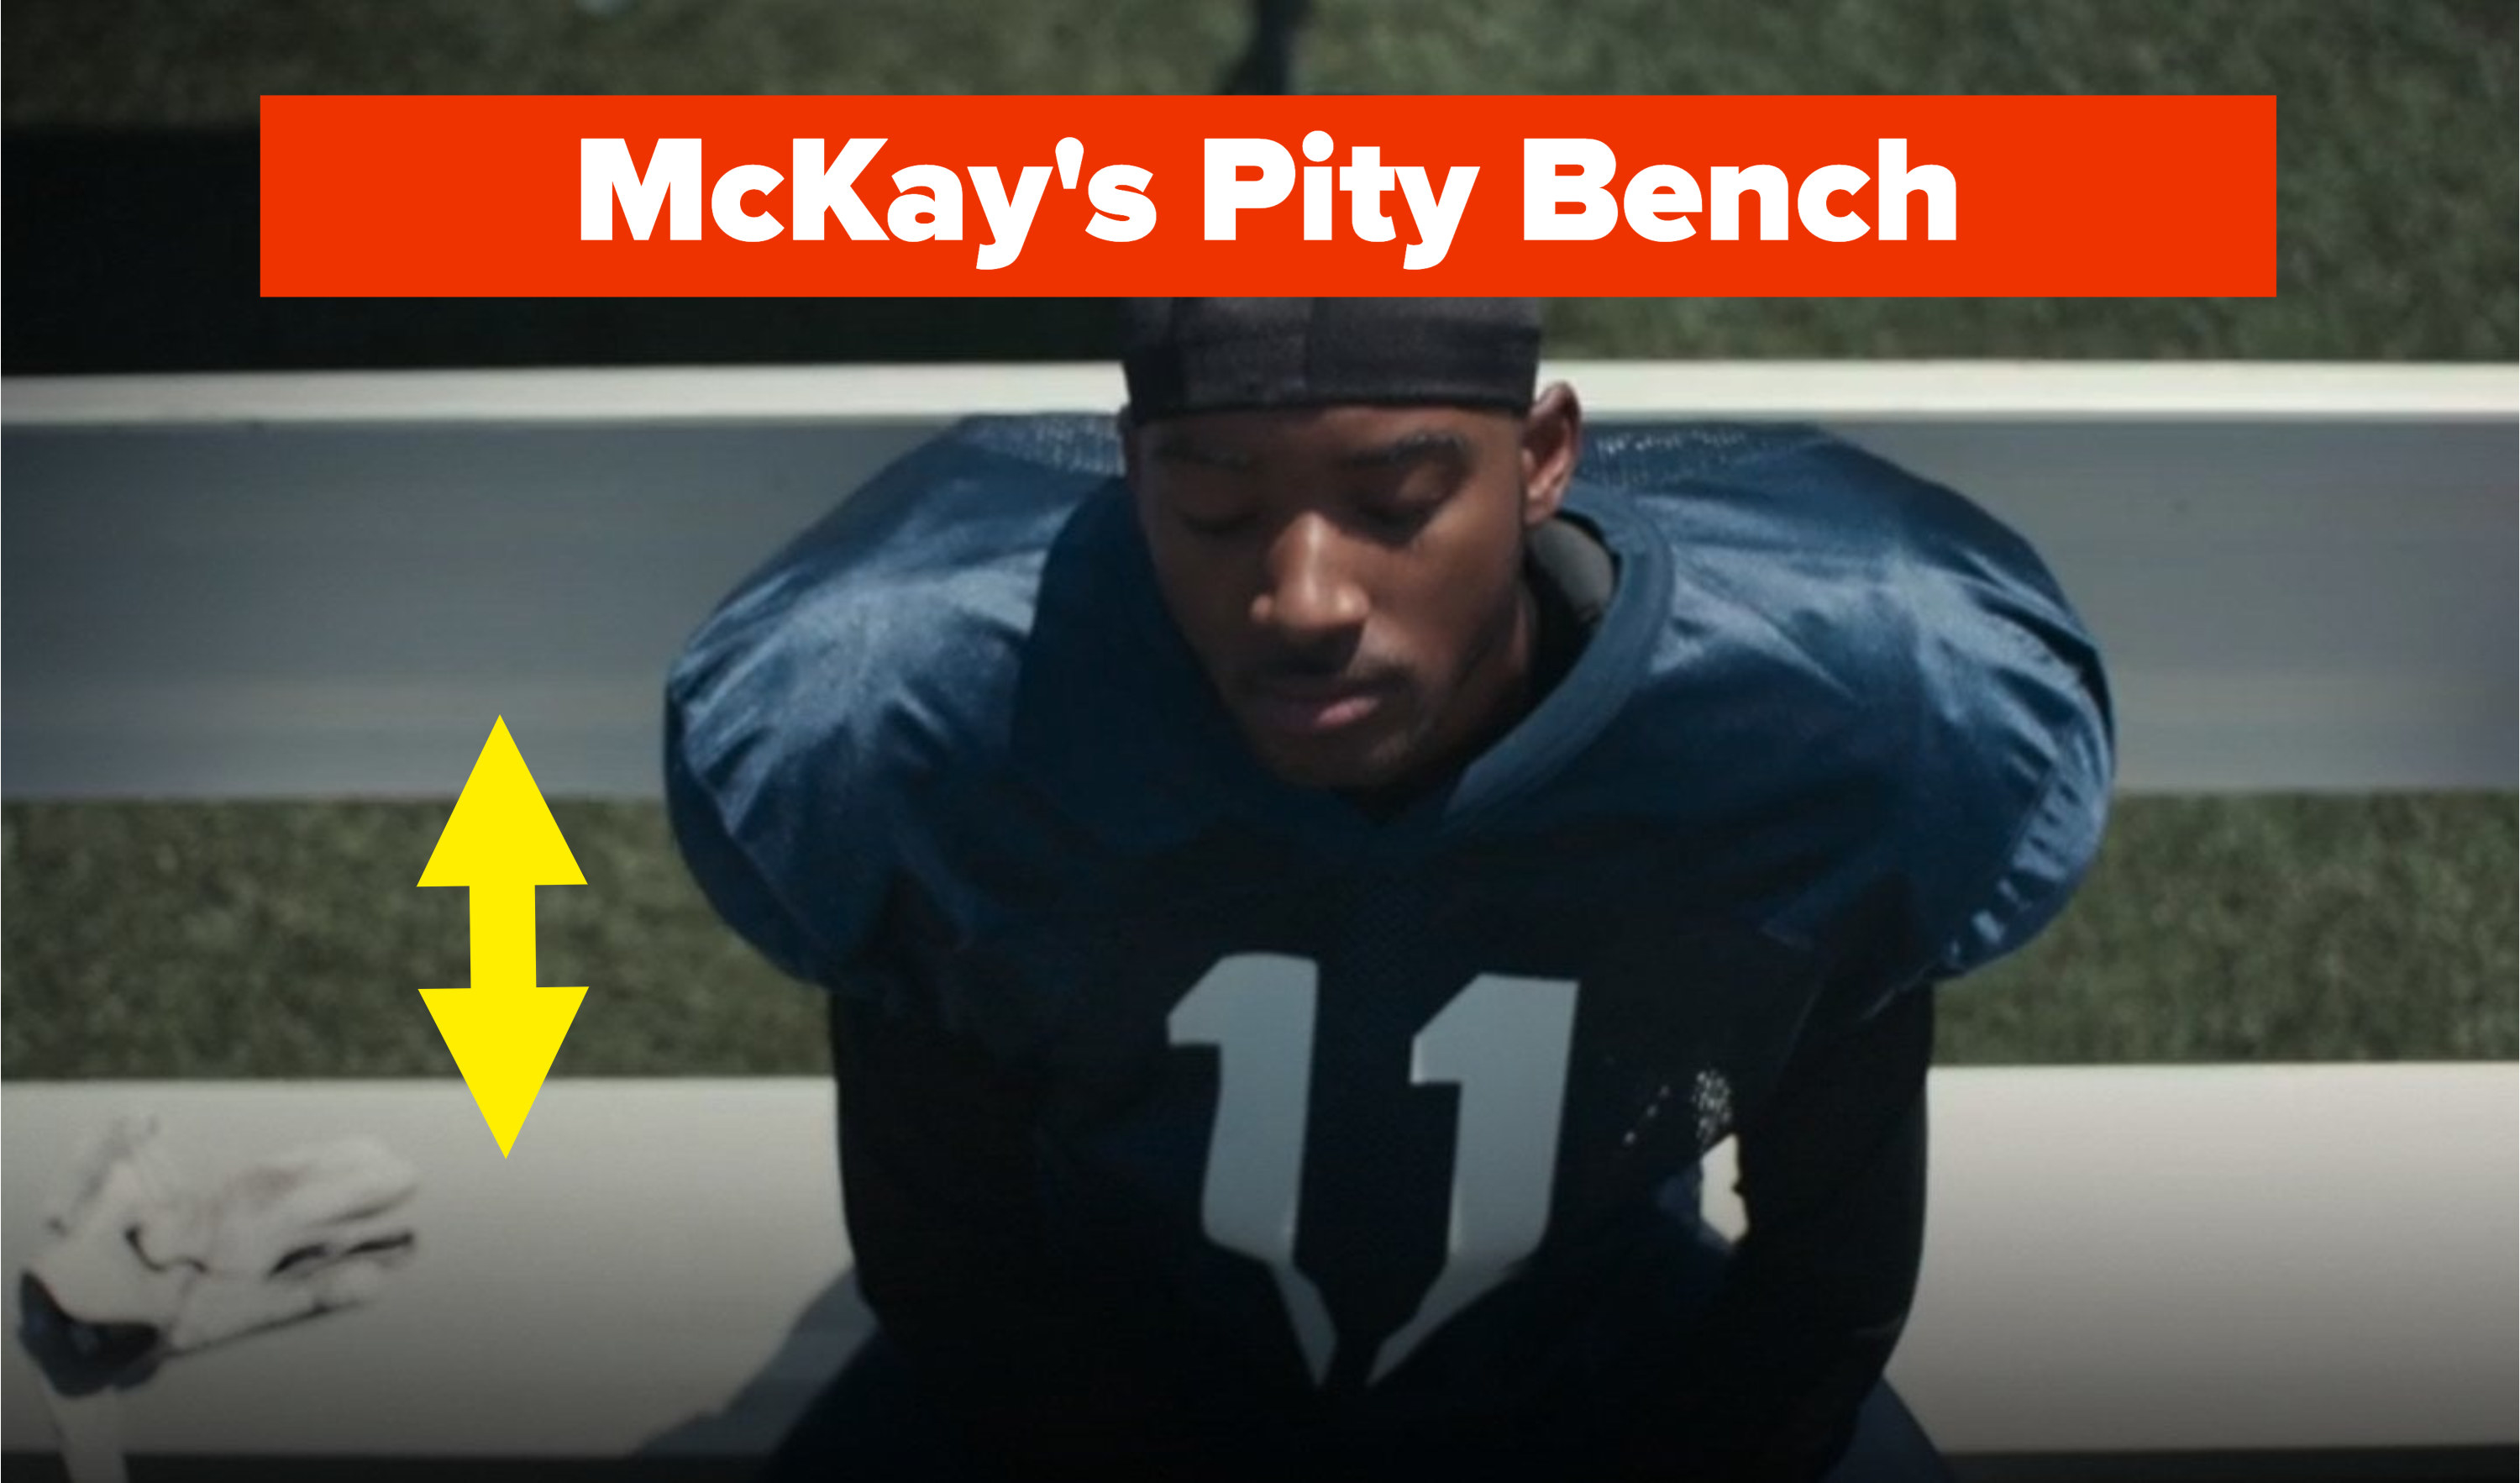 mckay sitting on a football bench